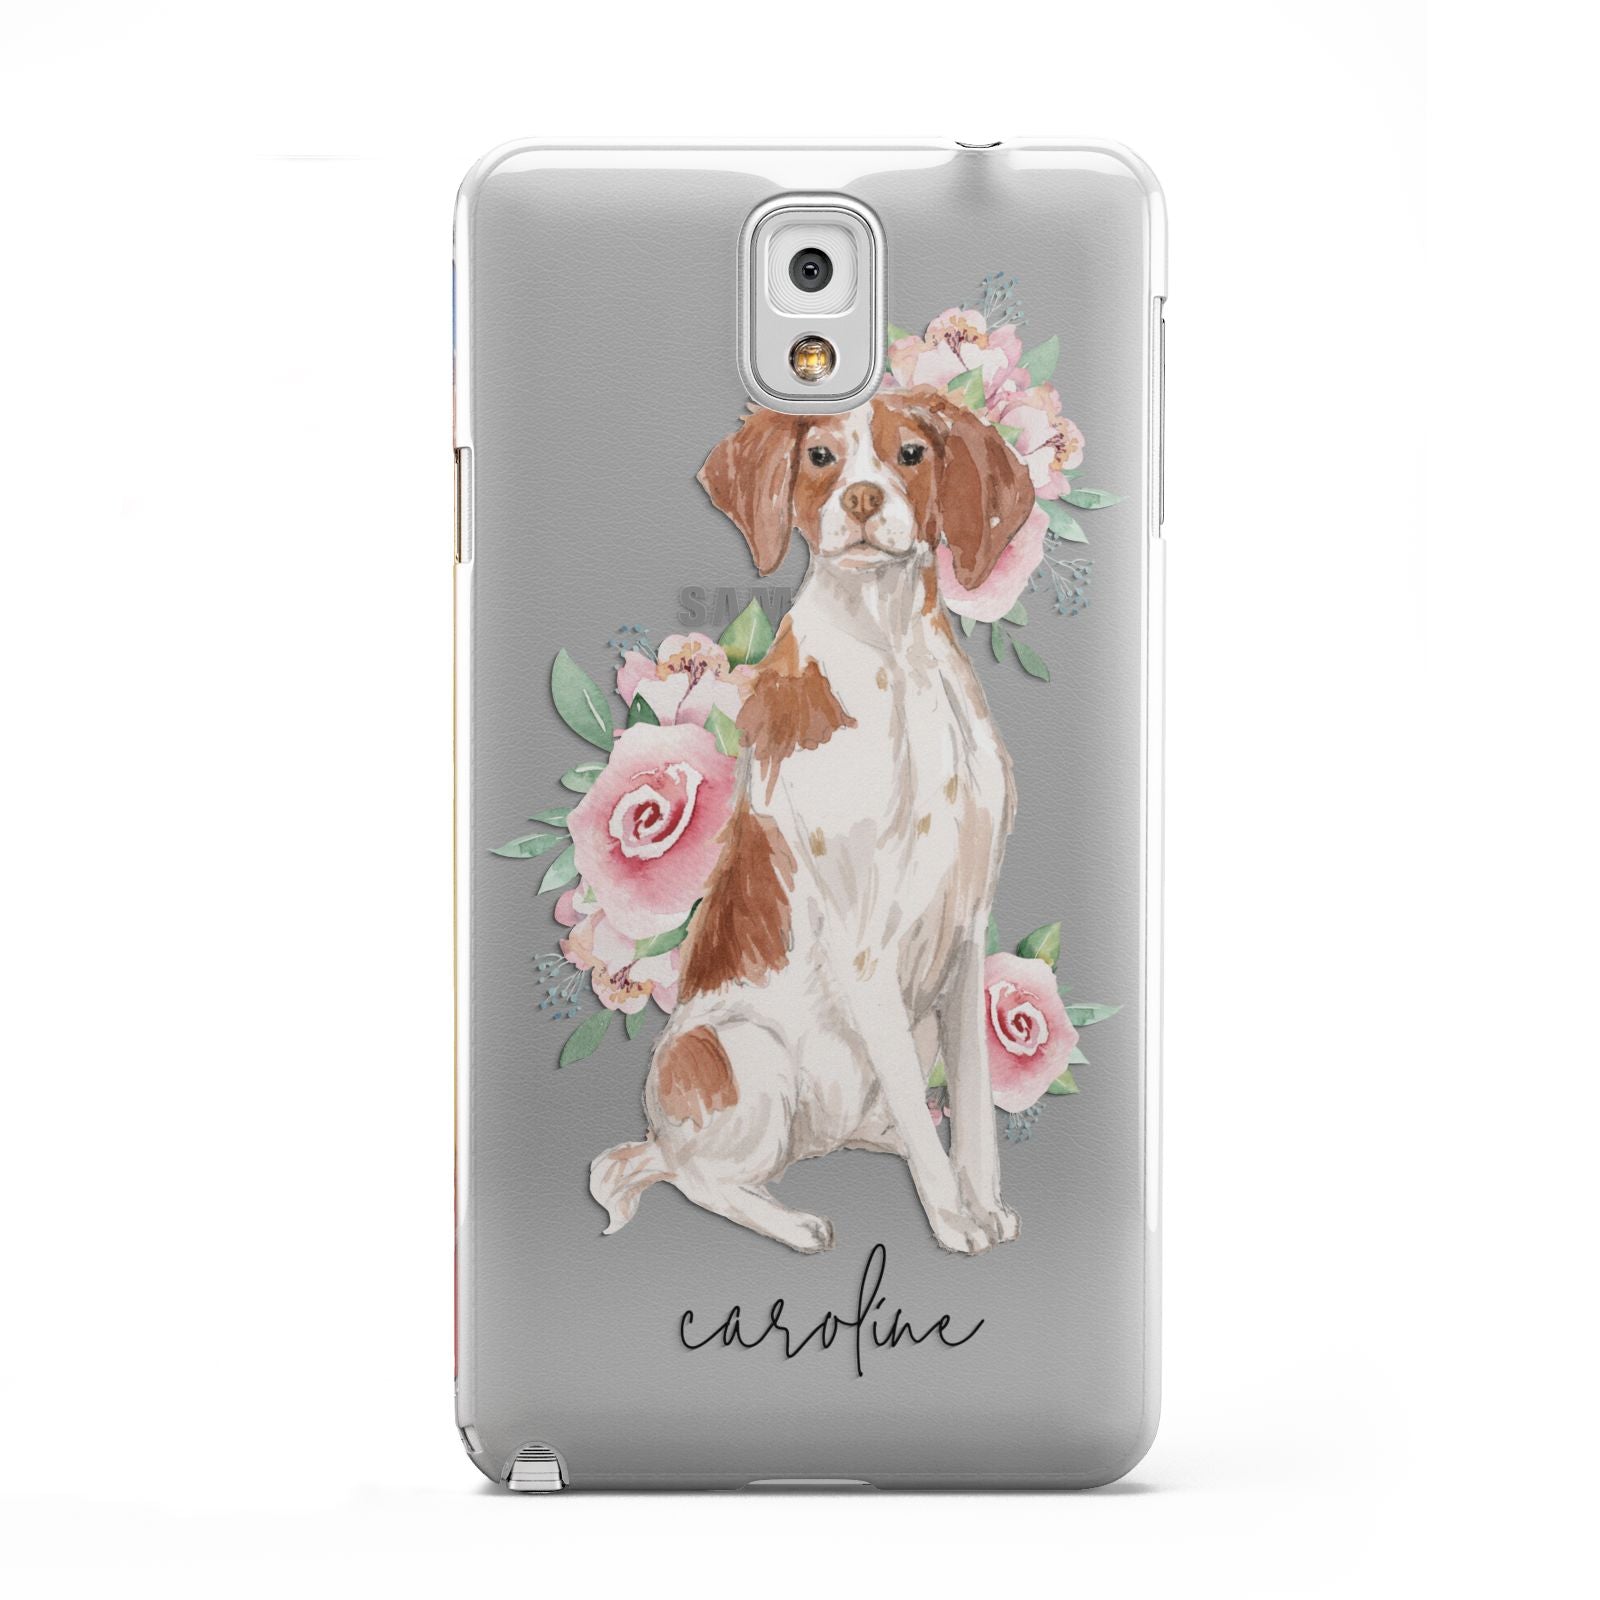 Personalised Brittany Dog Samsung Galaxy Note 3 Case